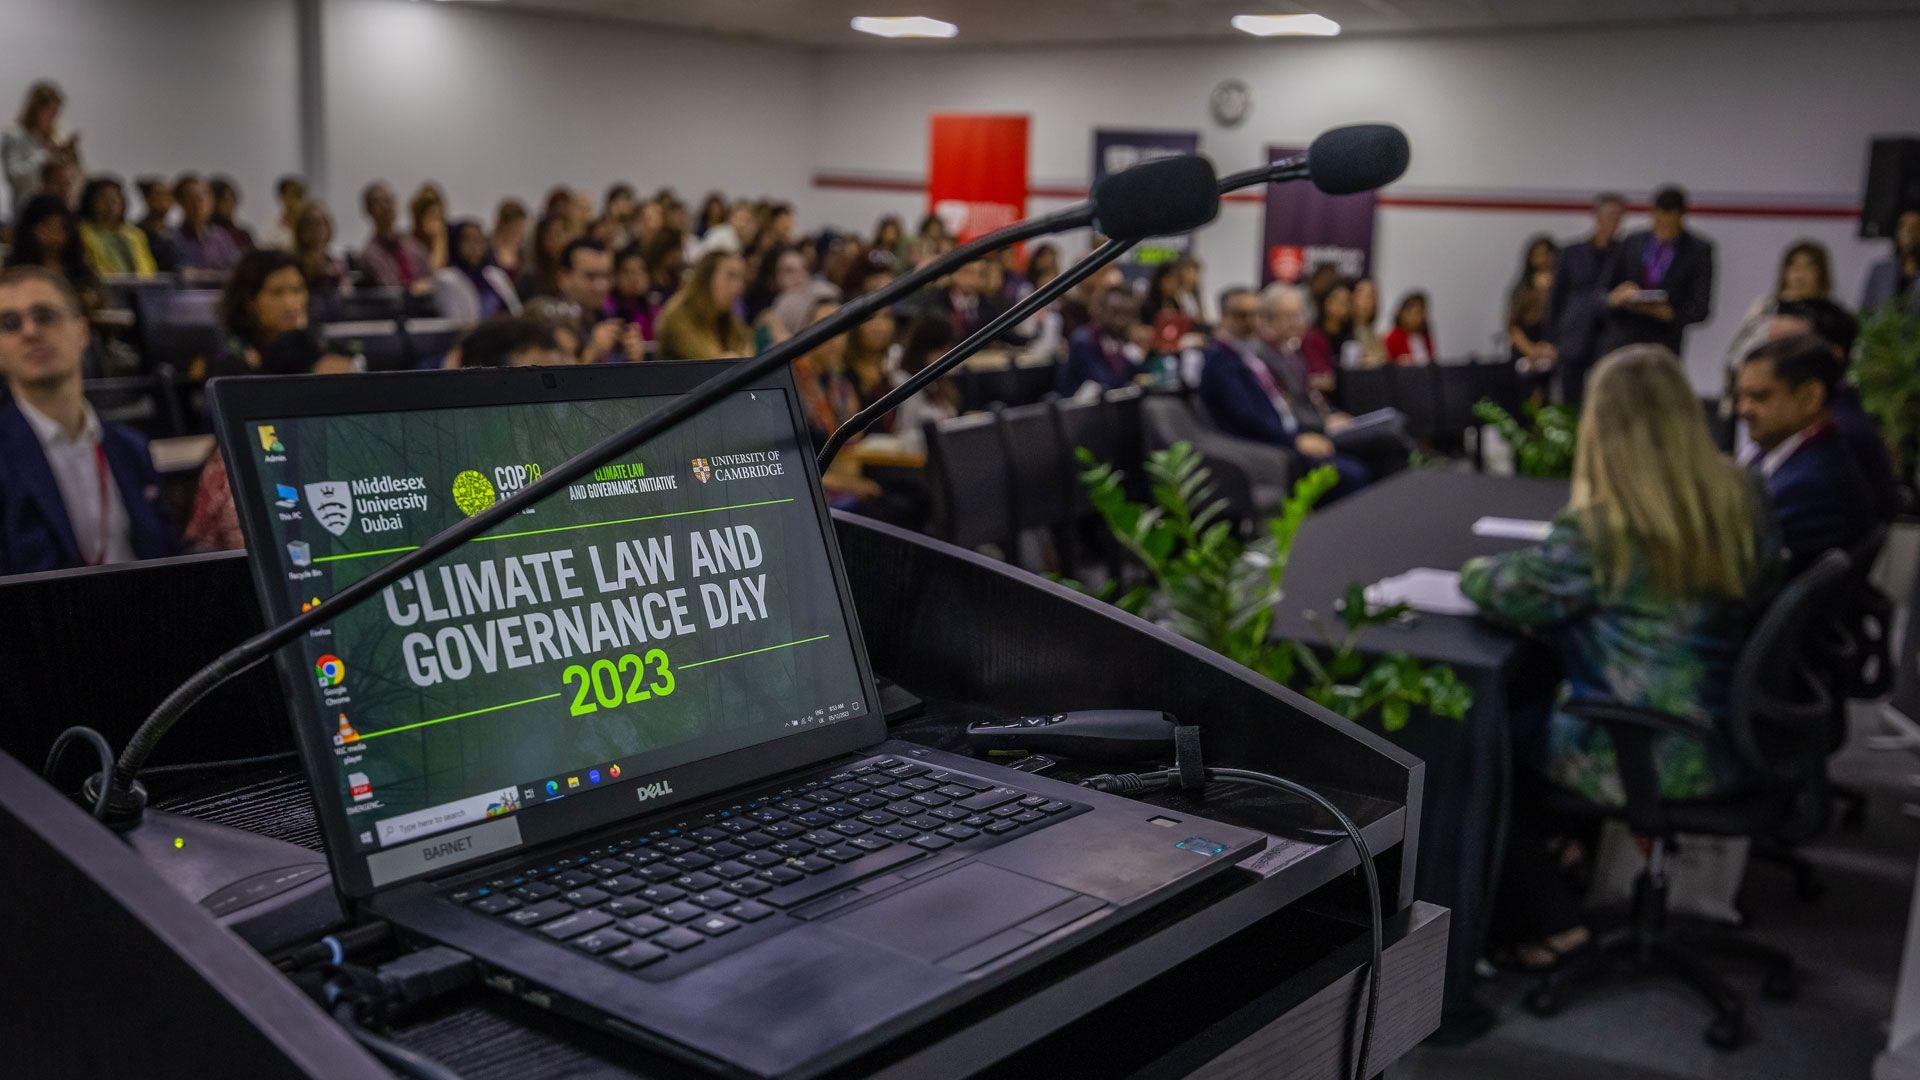 Middlesex University Dubai Hosts Annual CLGI Climate Law and Governance Day with Cambridge University